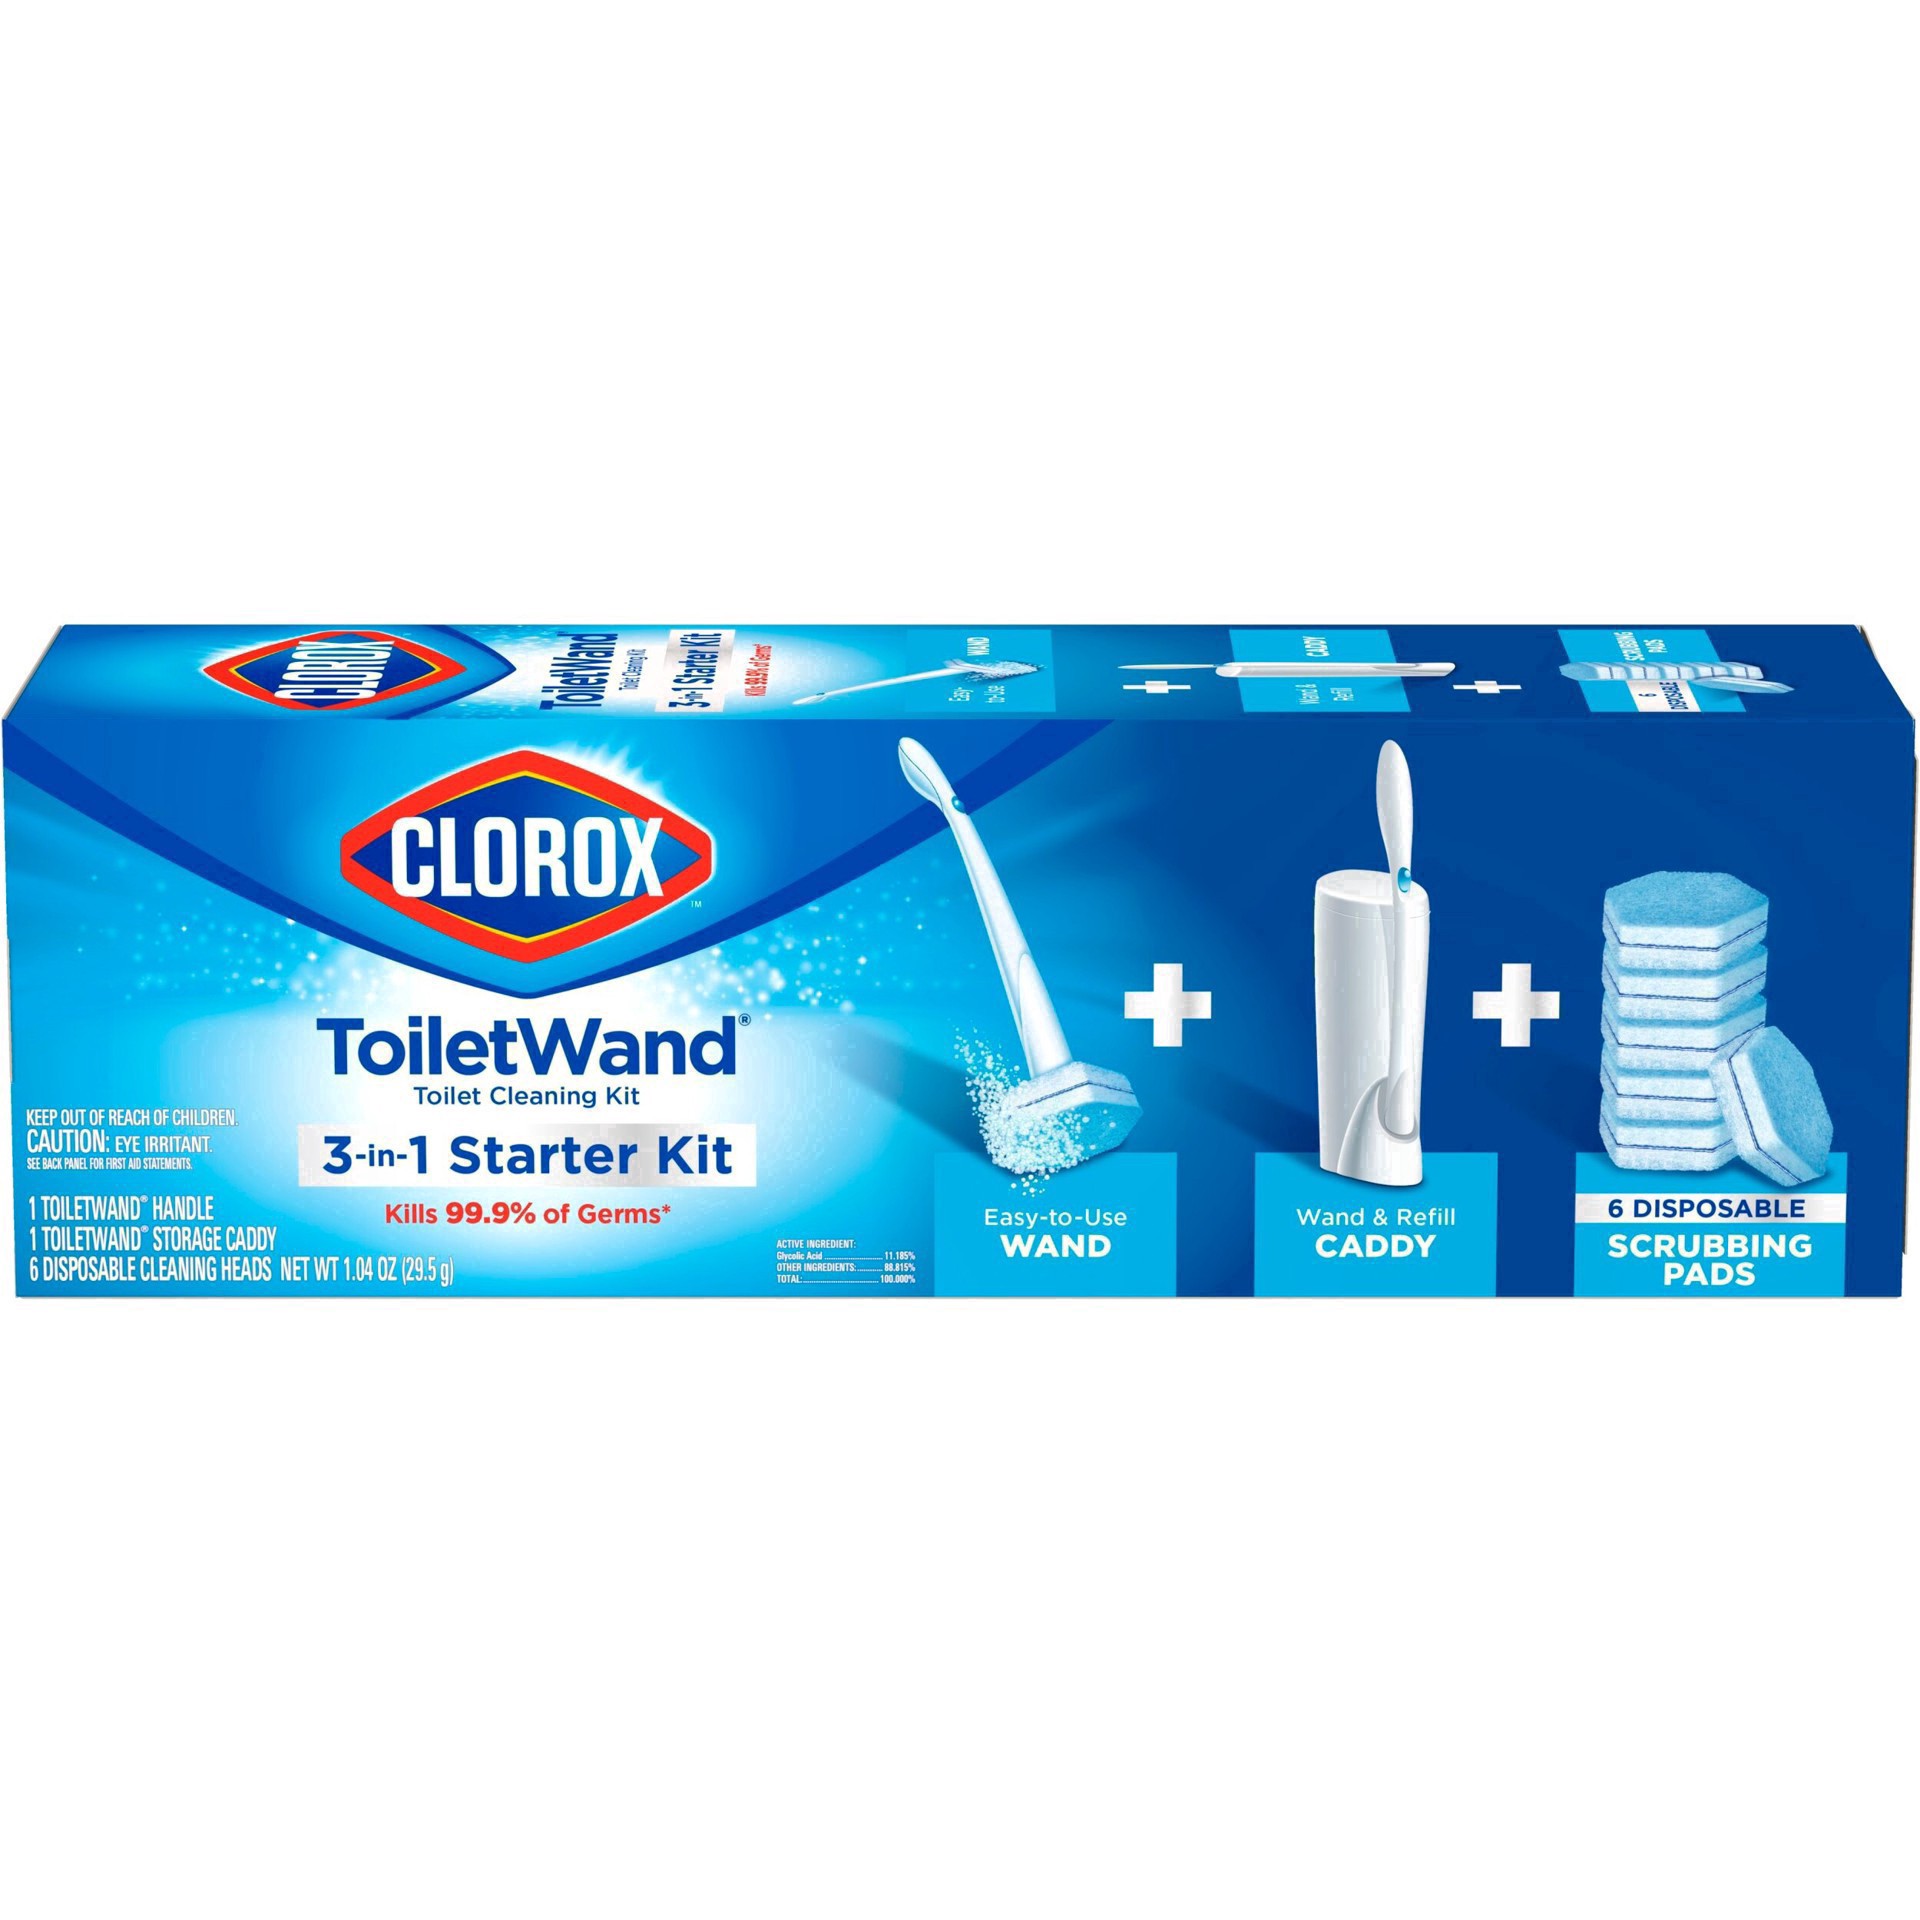 slide 16 of 176, Clorox Toilet Wand 3-in-1 Starter Toliet Cleaning Kit, 1 ct